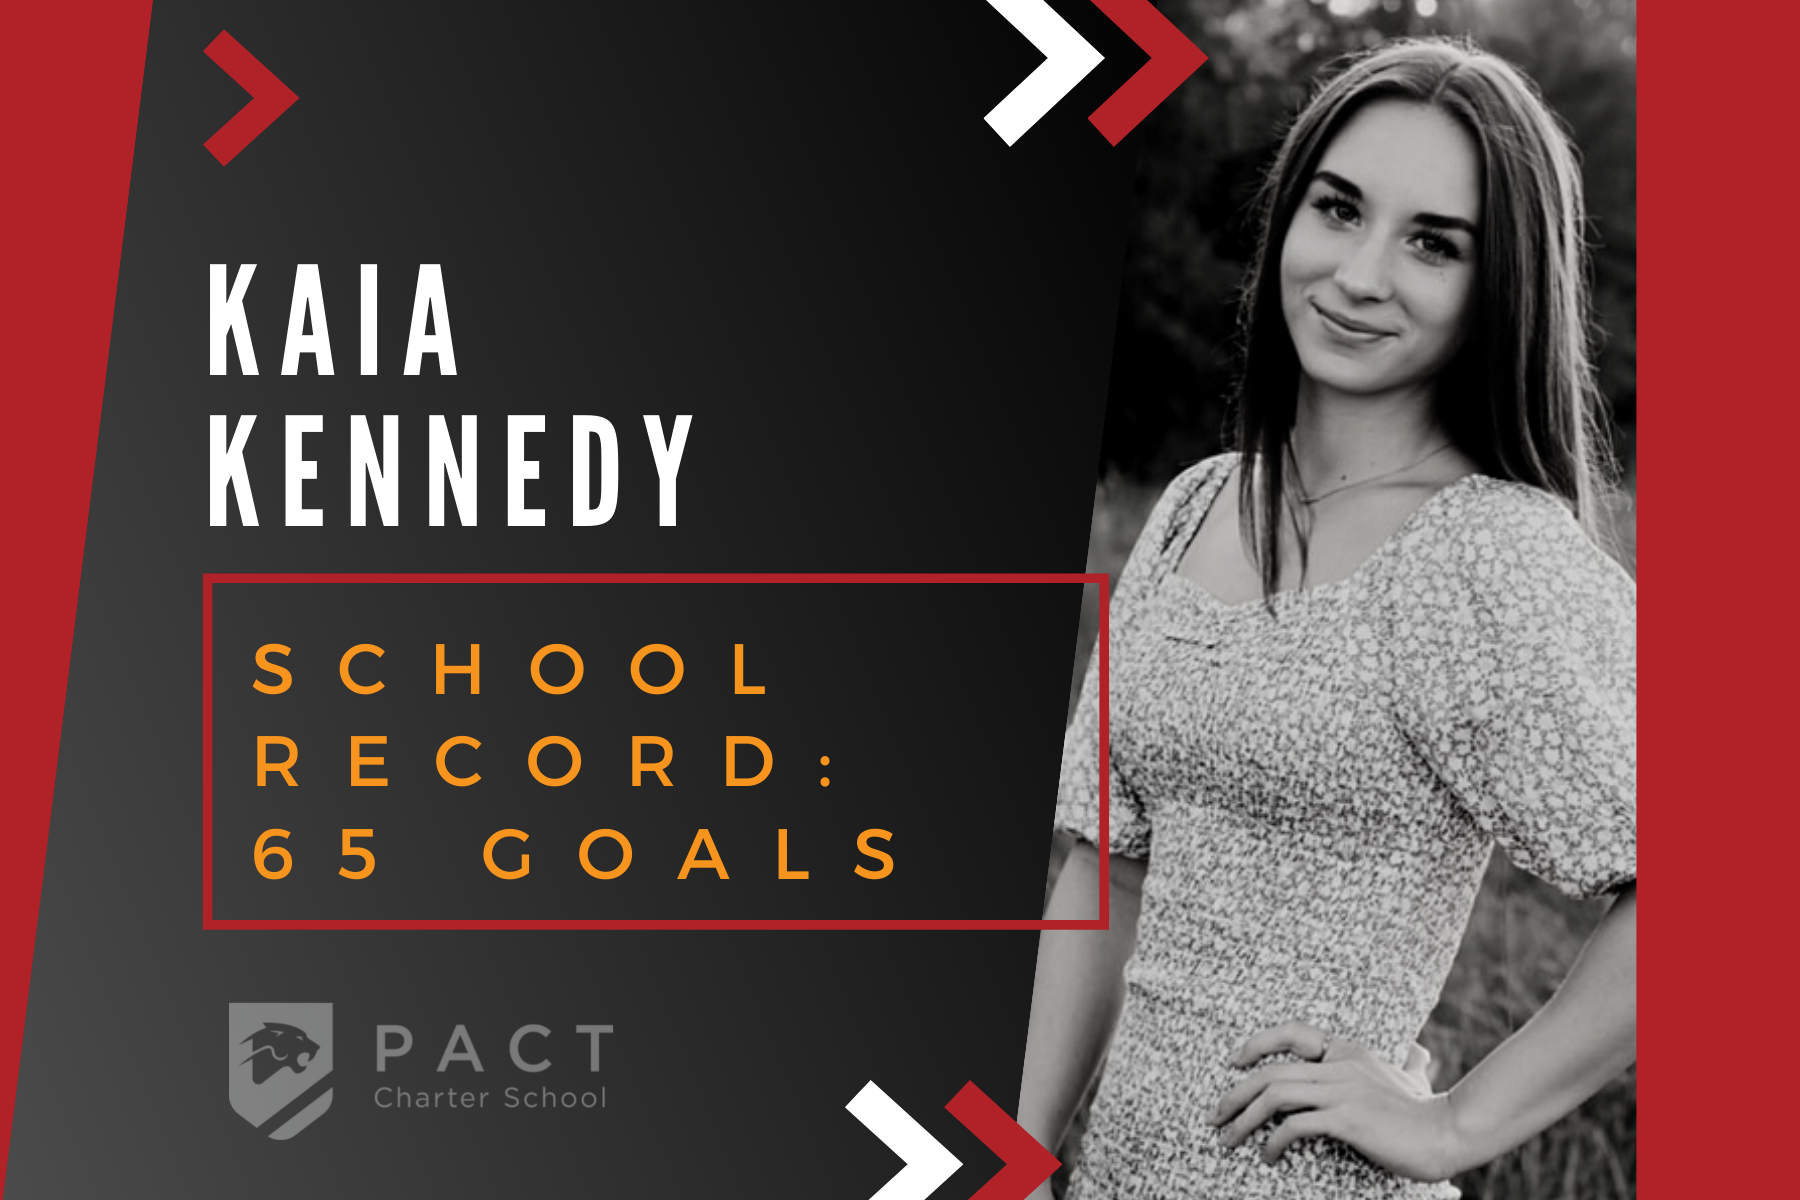 Kaia Kennedy Sets School Record in Goals